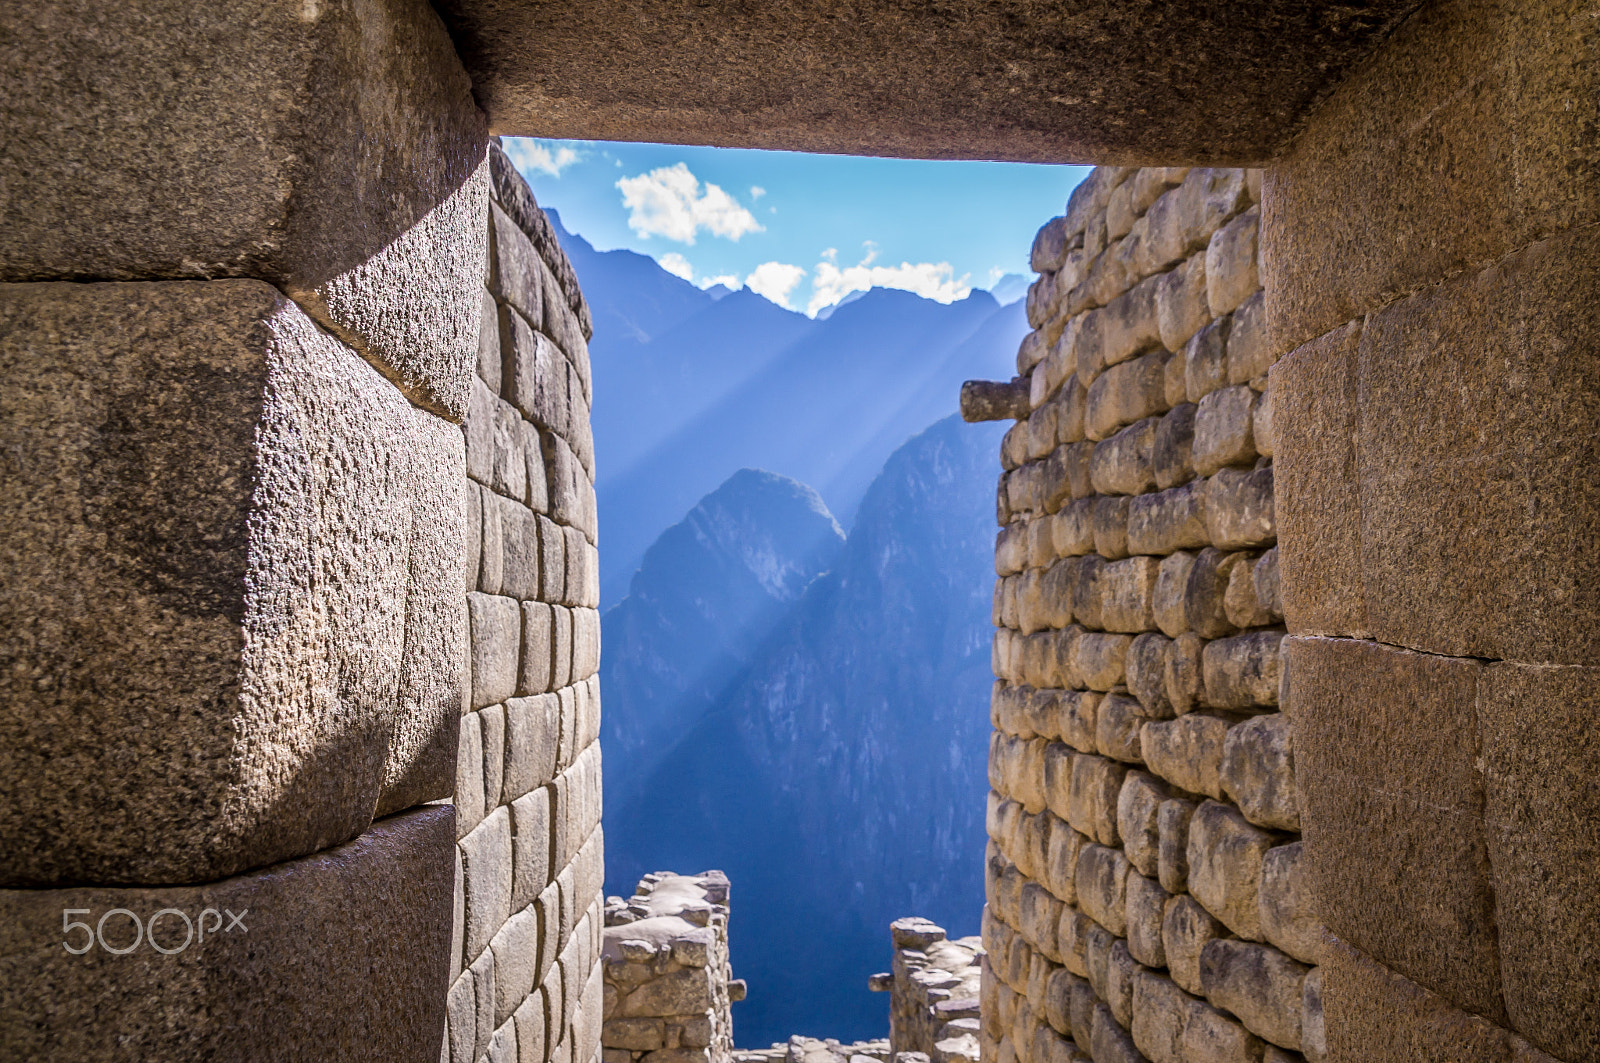 Sony SLT-A37 sample photo. Interior view of machu picchu lost inca city photography